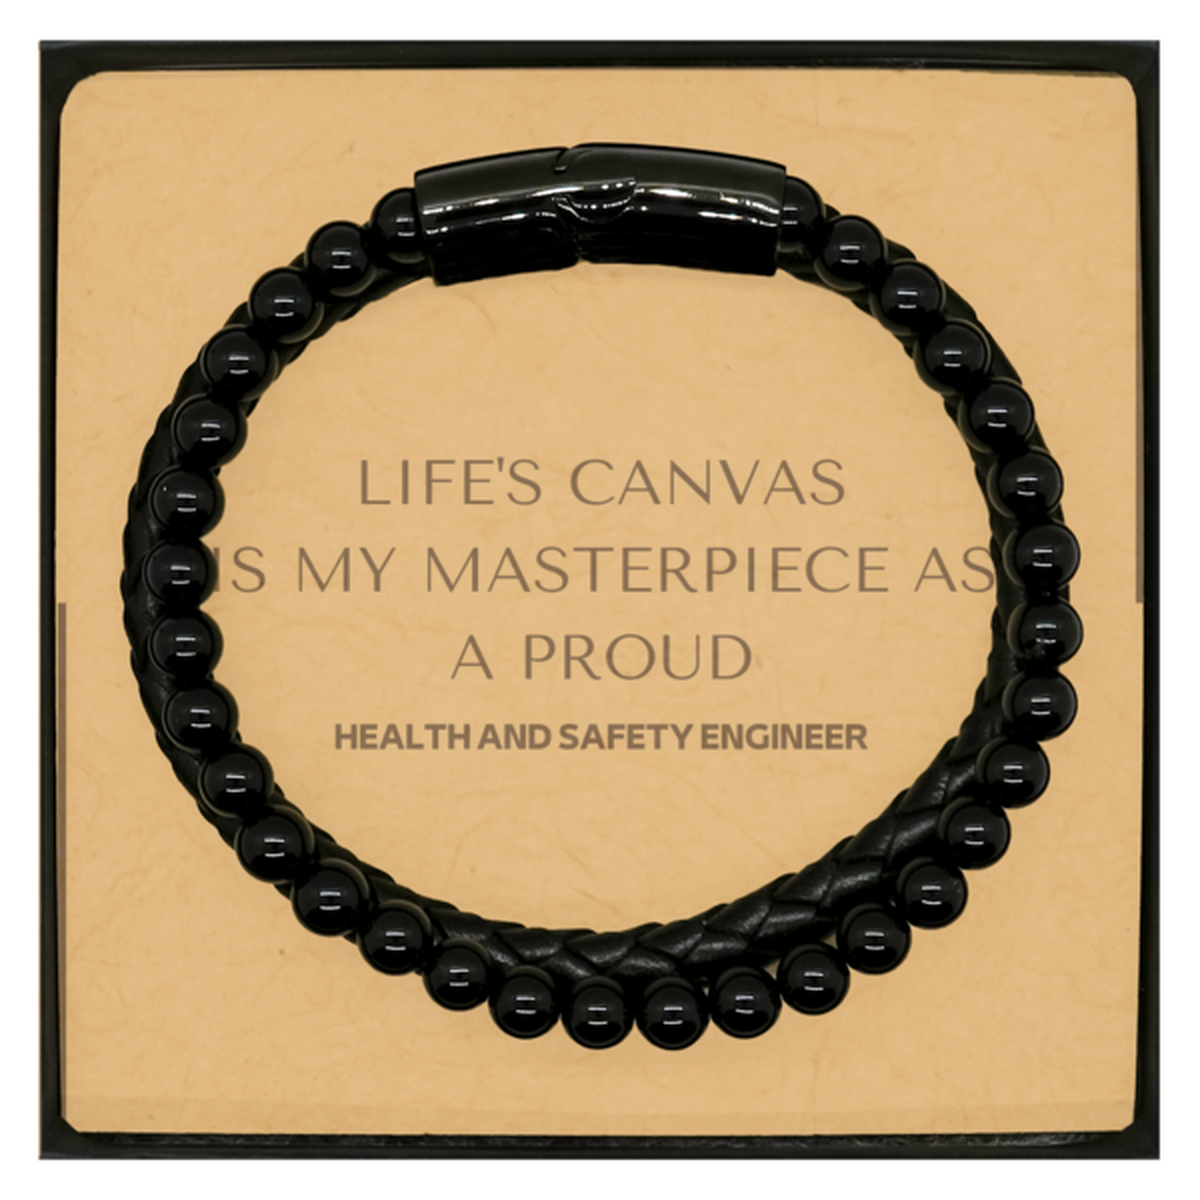 Proud Health and Safety Engineer Gifts, Life's canvas is my masterpiece, Epic Birthday Christmas Unique Stone Leather Bracelets For Health and Safety Engineer, Coworkers, Men, Women, Friends